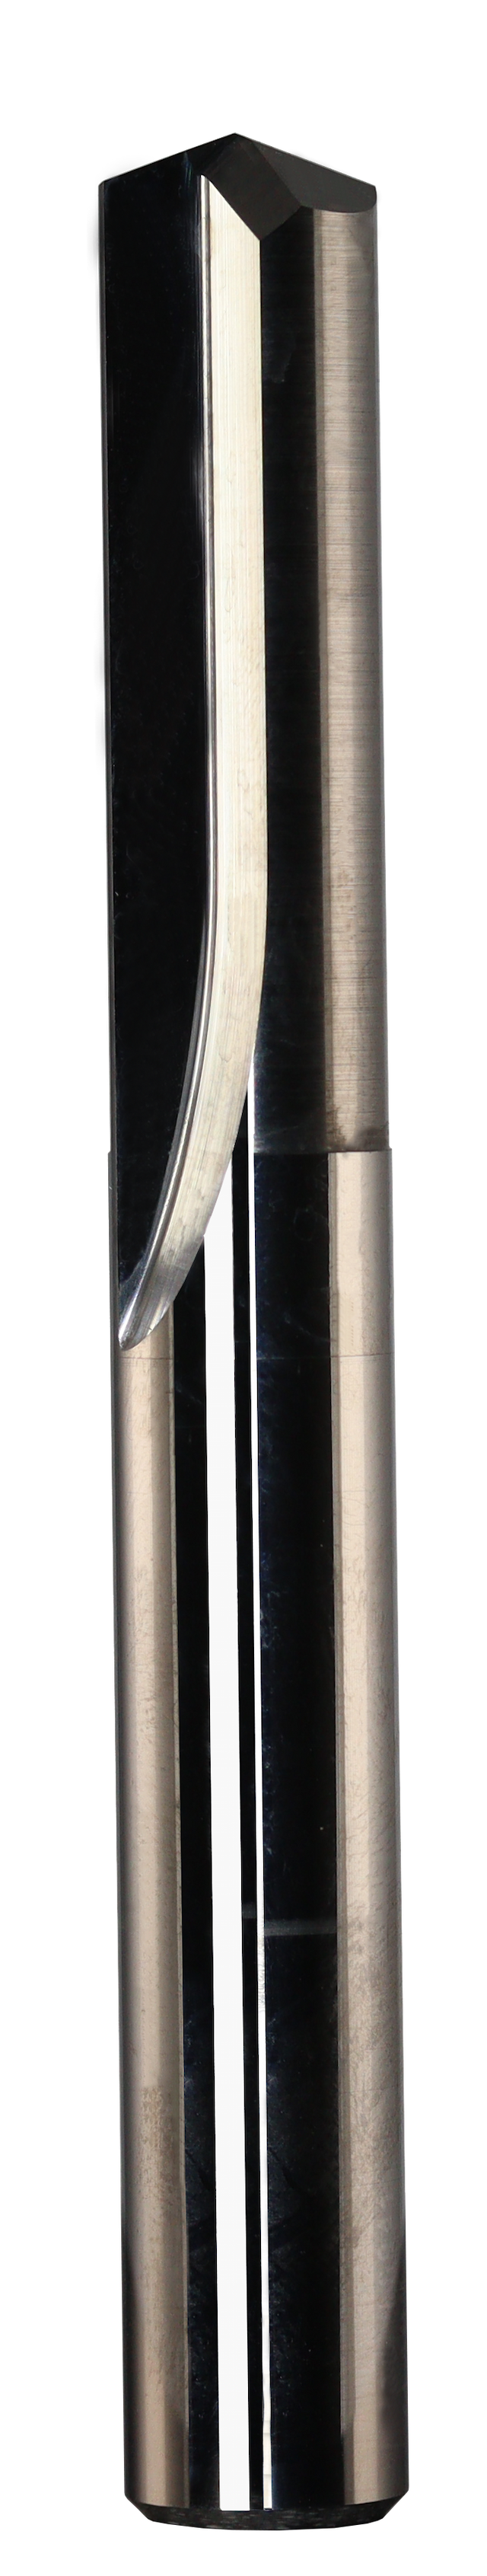 25/64" Dia, 140 Degree Point, Solid Carbide Drill - 56125